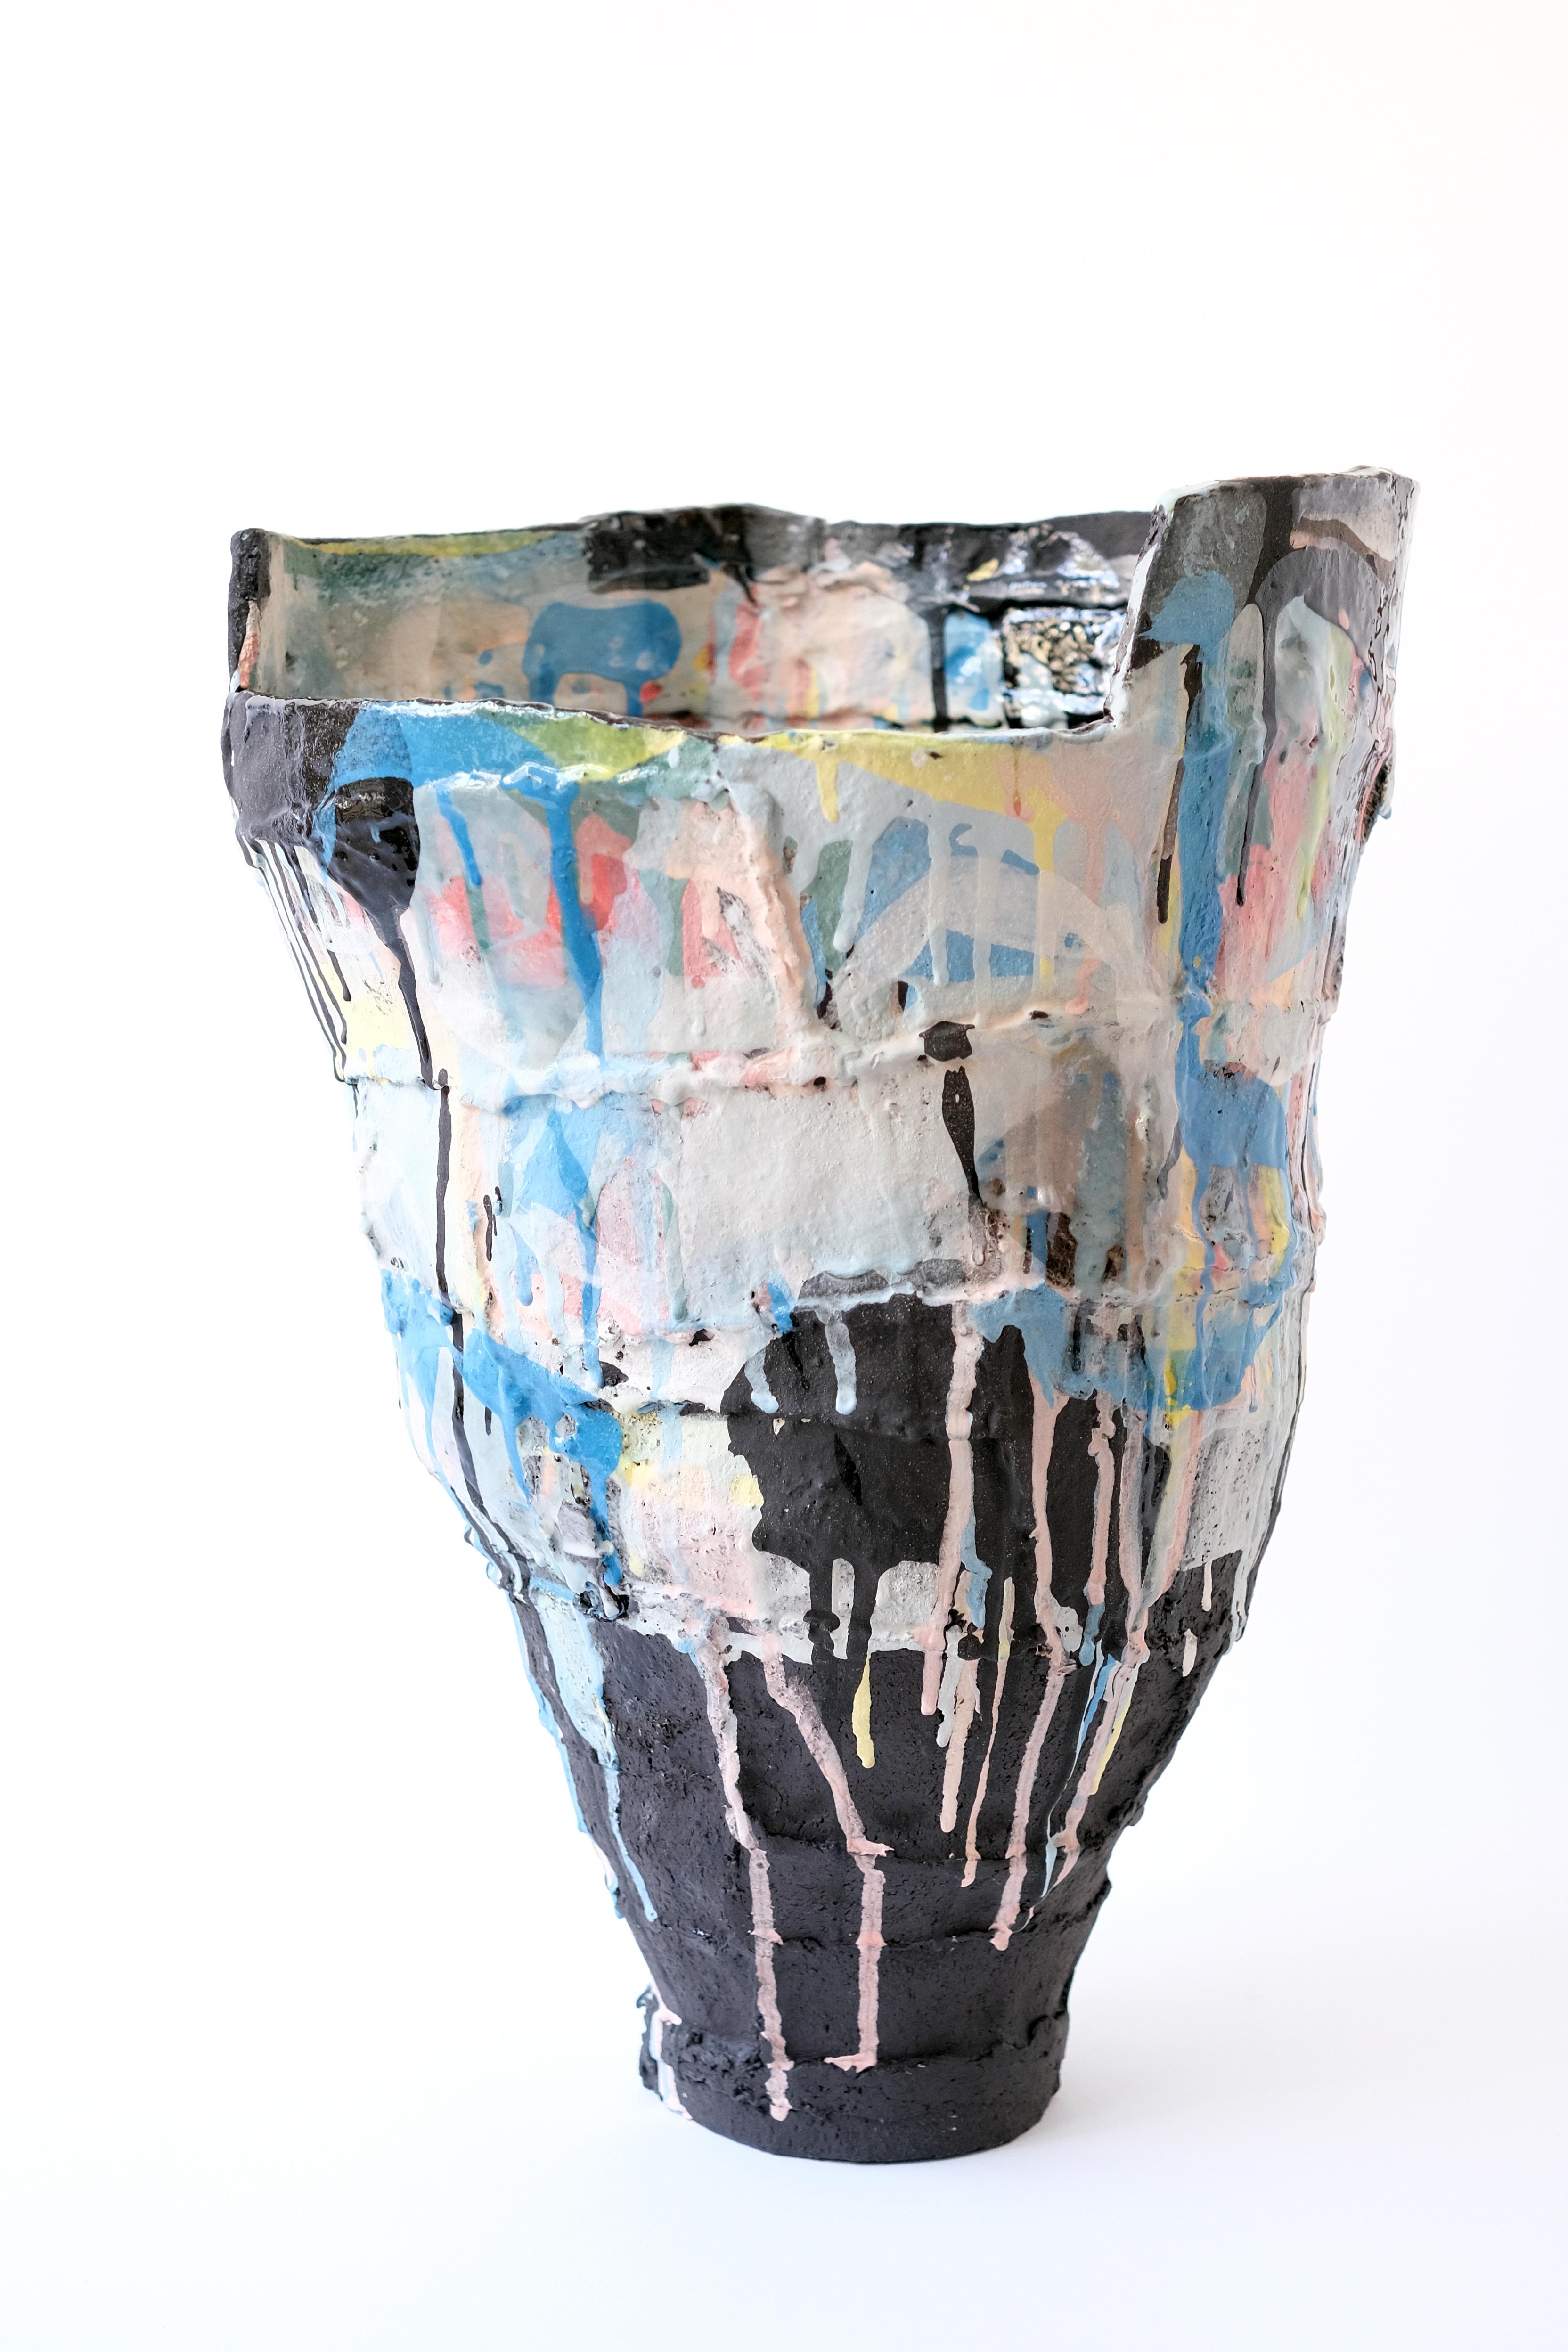 Ardea Cinerea vase by Elke Sada
Unique piece
Dimensions: W 31 x D 32 x H 45 cm
Materials: black grogged clay, coloured slips, transparent glaze.

What is fascinating and striking about Elke Sada’s ceramic art is not only the radiance of